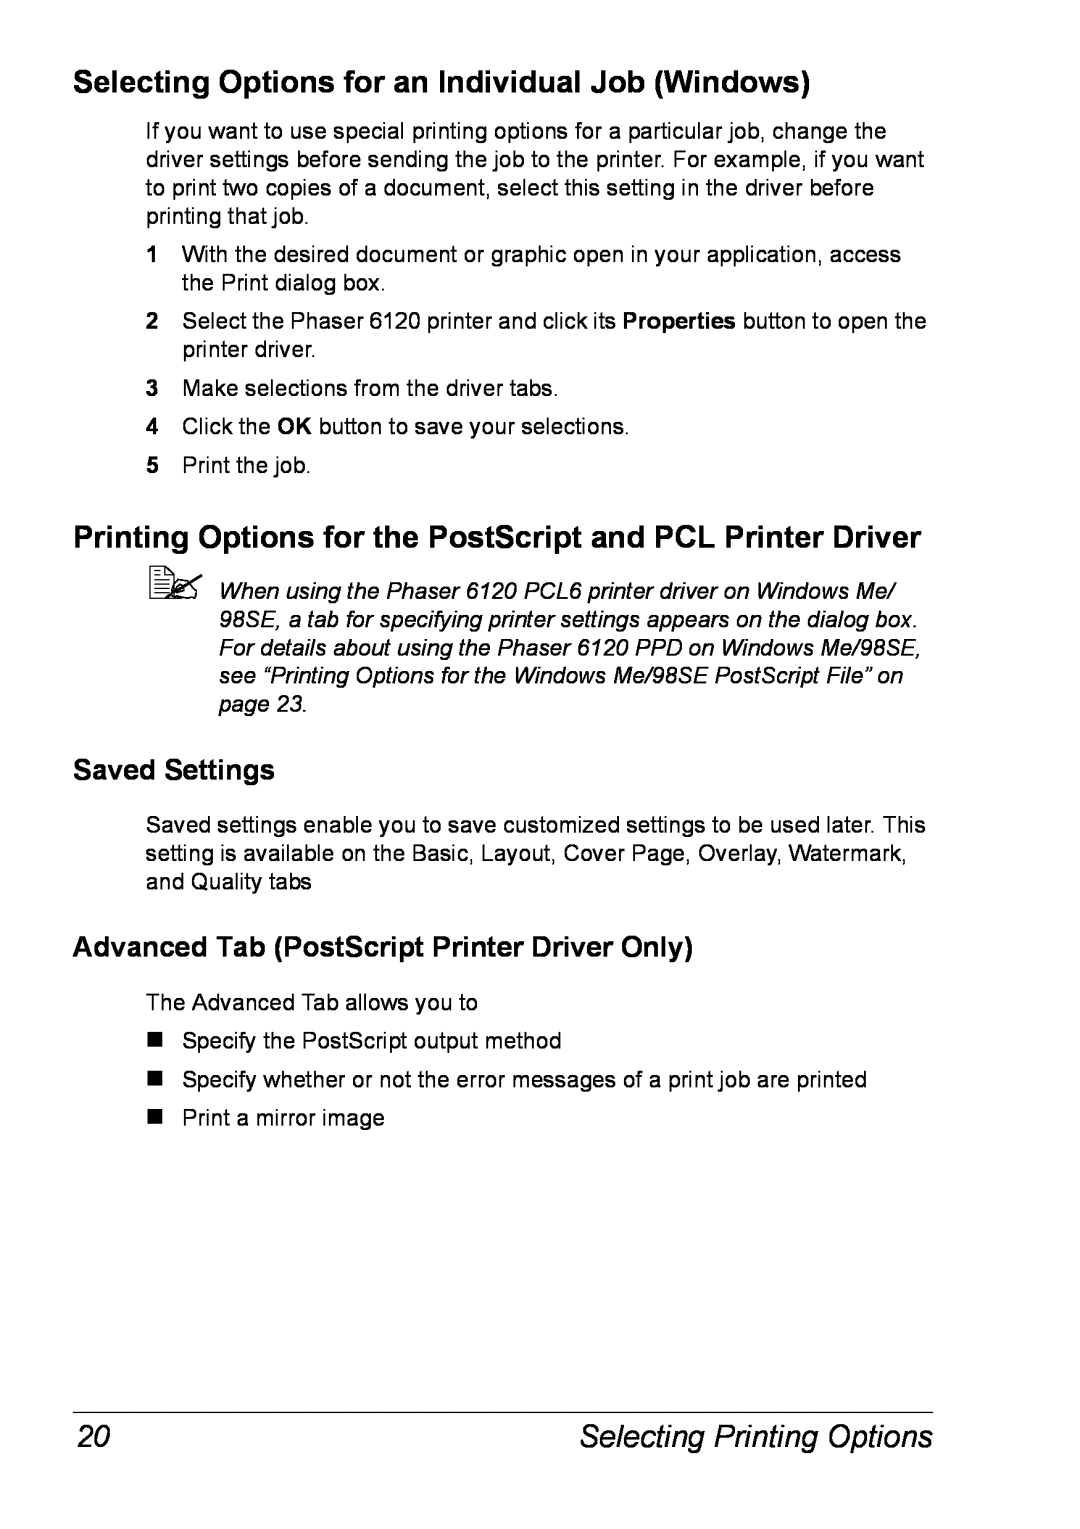 Xerox 6120 Selecting Options for an Individual Job Windows, Printing Options for the PostScript and PCL Printer Driver 